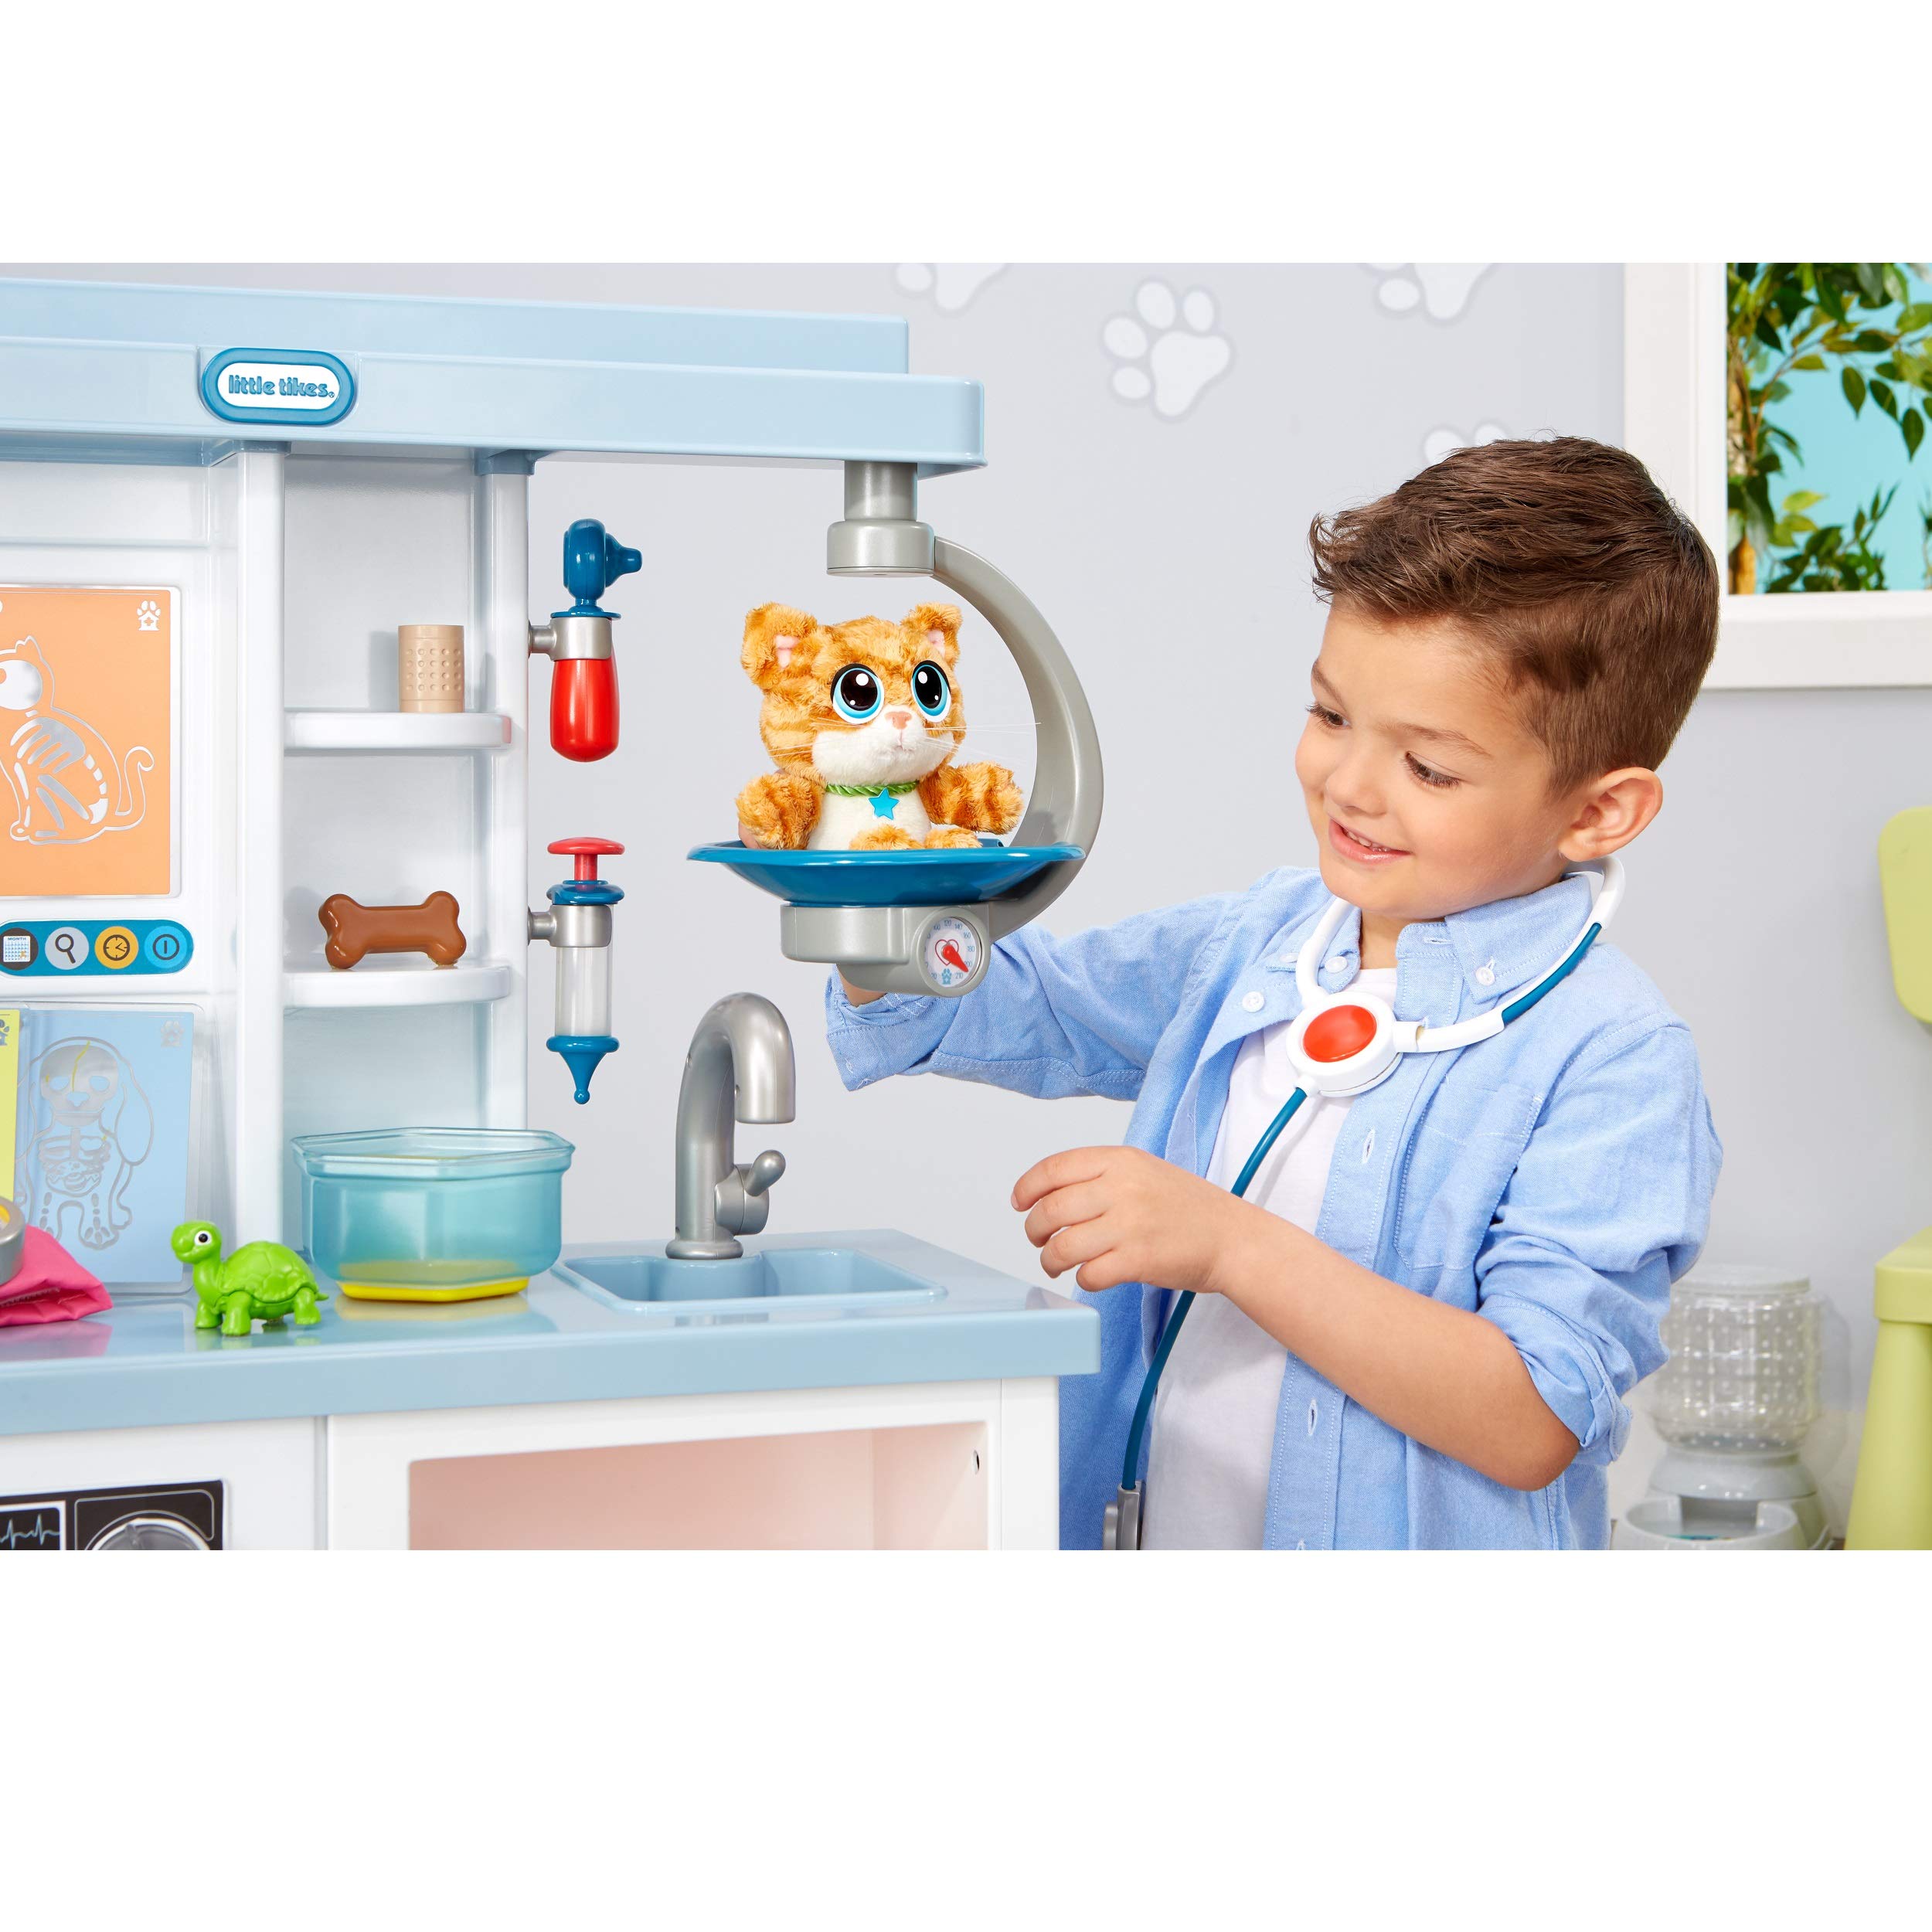 Little Tikes Vet Toys for Kids - My First Pet Doctor Checkup Pretend Play Set Veterinarian Playset - Over 15 Accessories, Multicolor Interactive Medical Vet Clinic